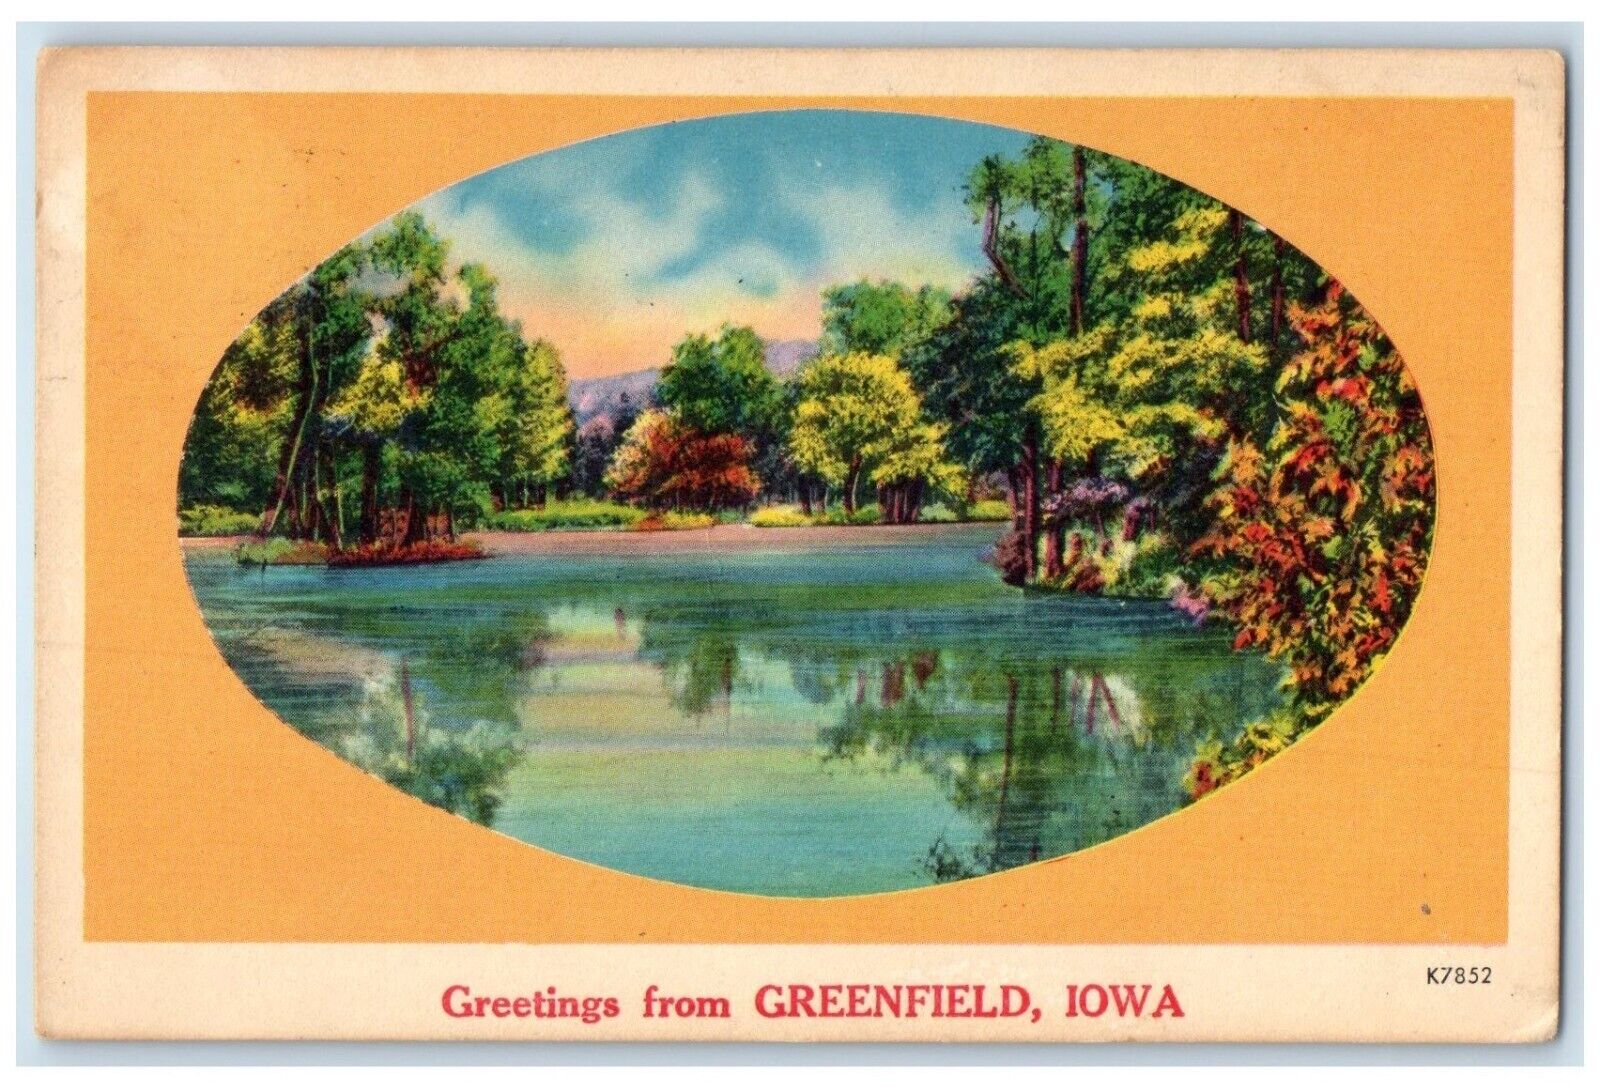 1958 Greetings From Lake River Trees Greenfield Iowa IA Vintage Antique Postcard